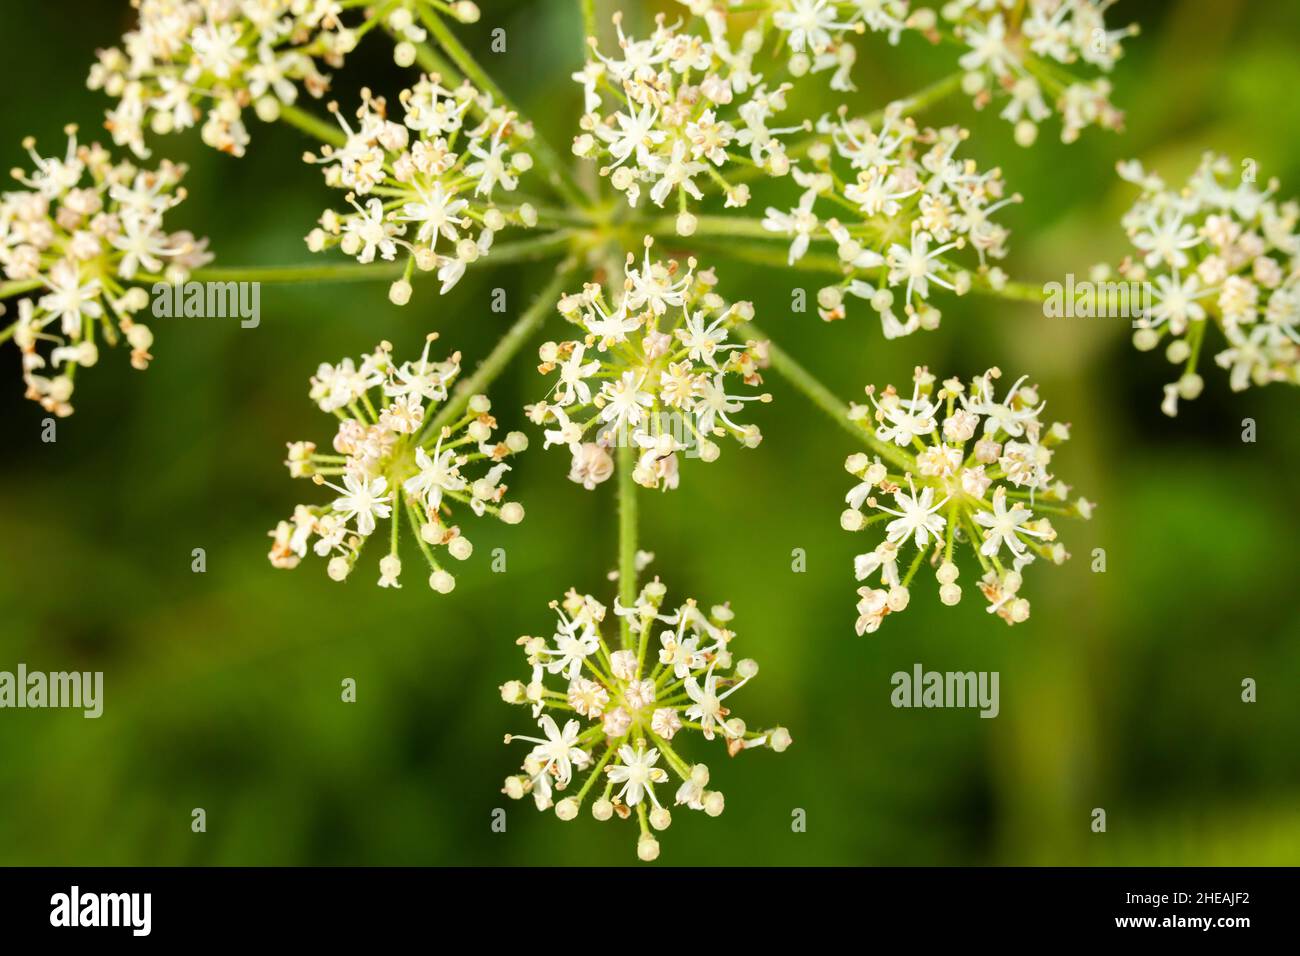 Cow parsley wildflower weed close up with natural green background Stock Photo